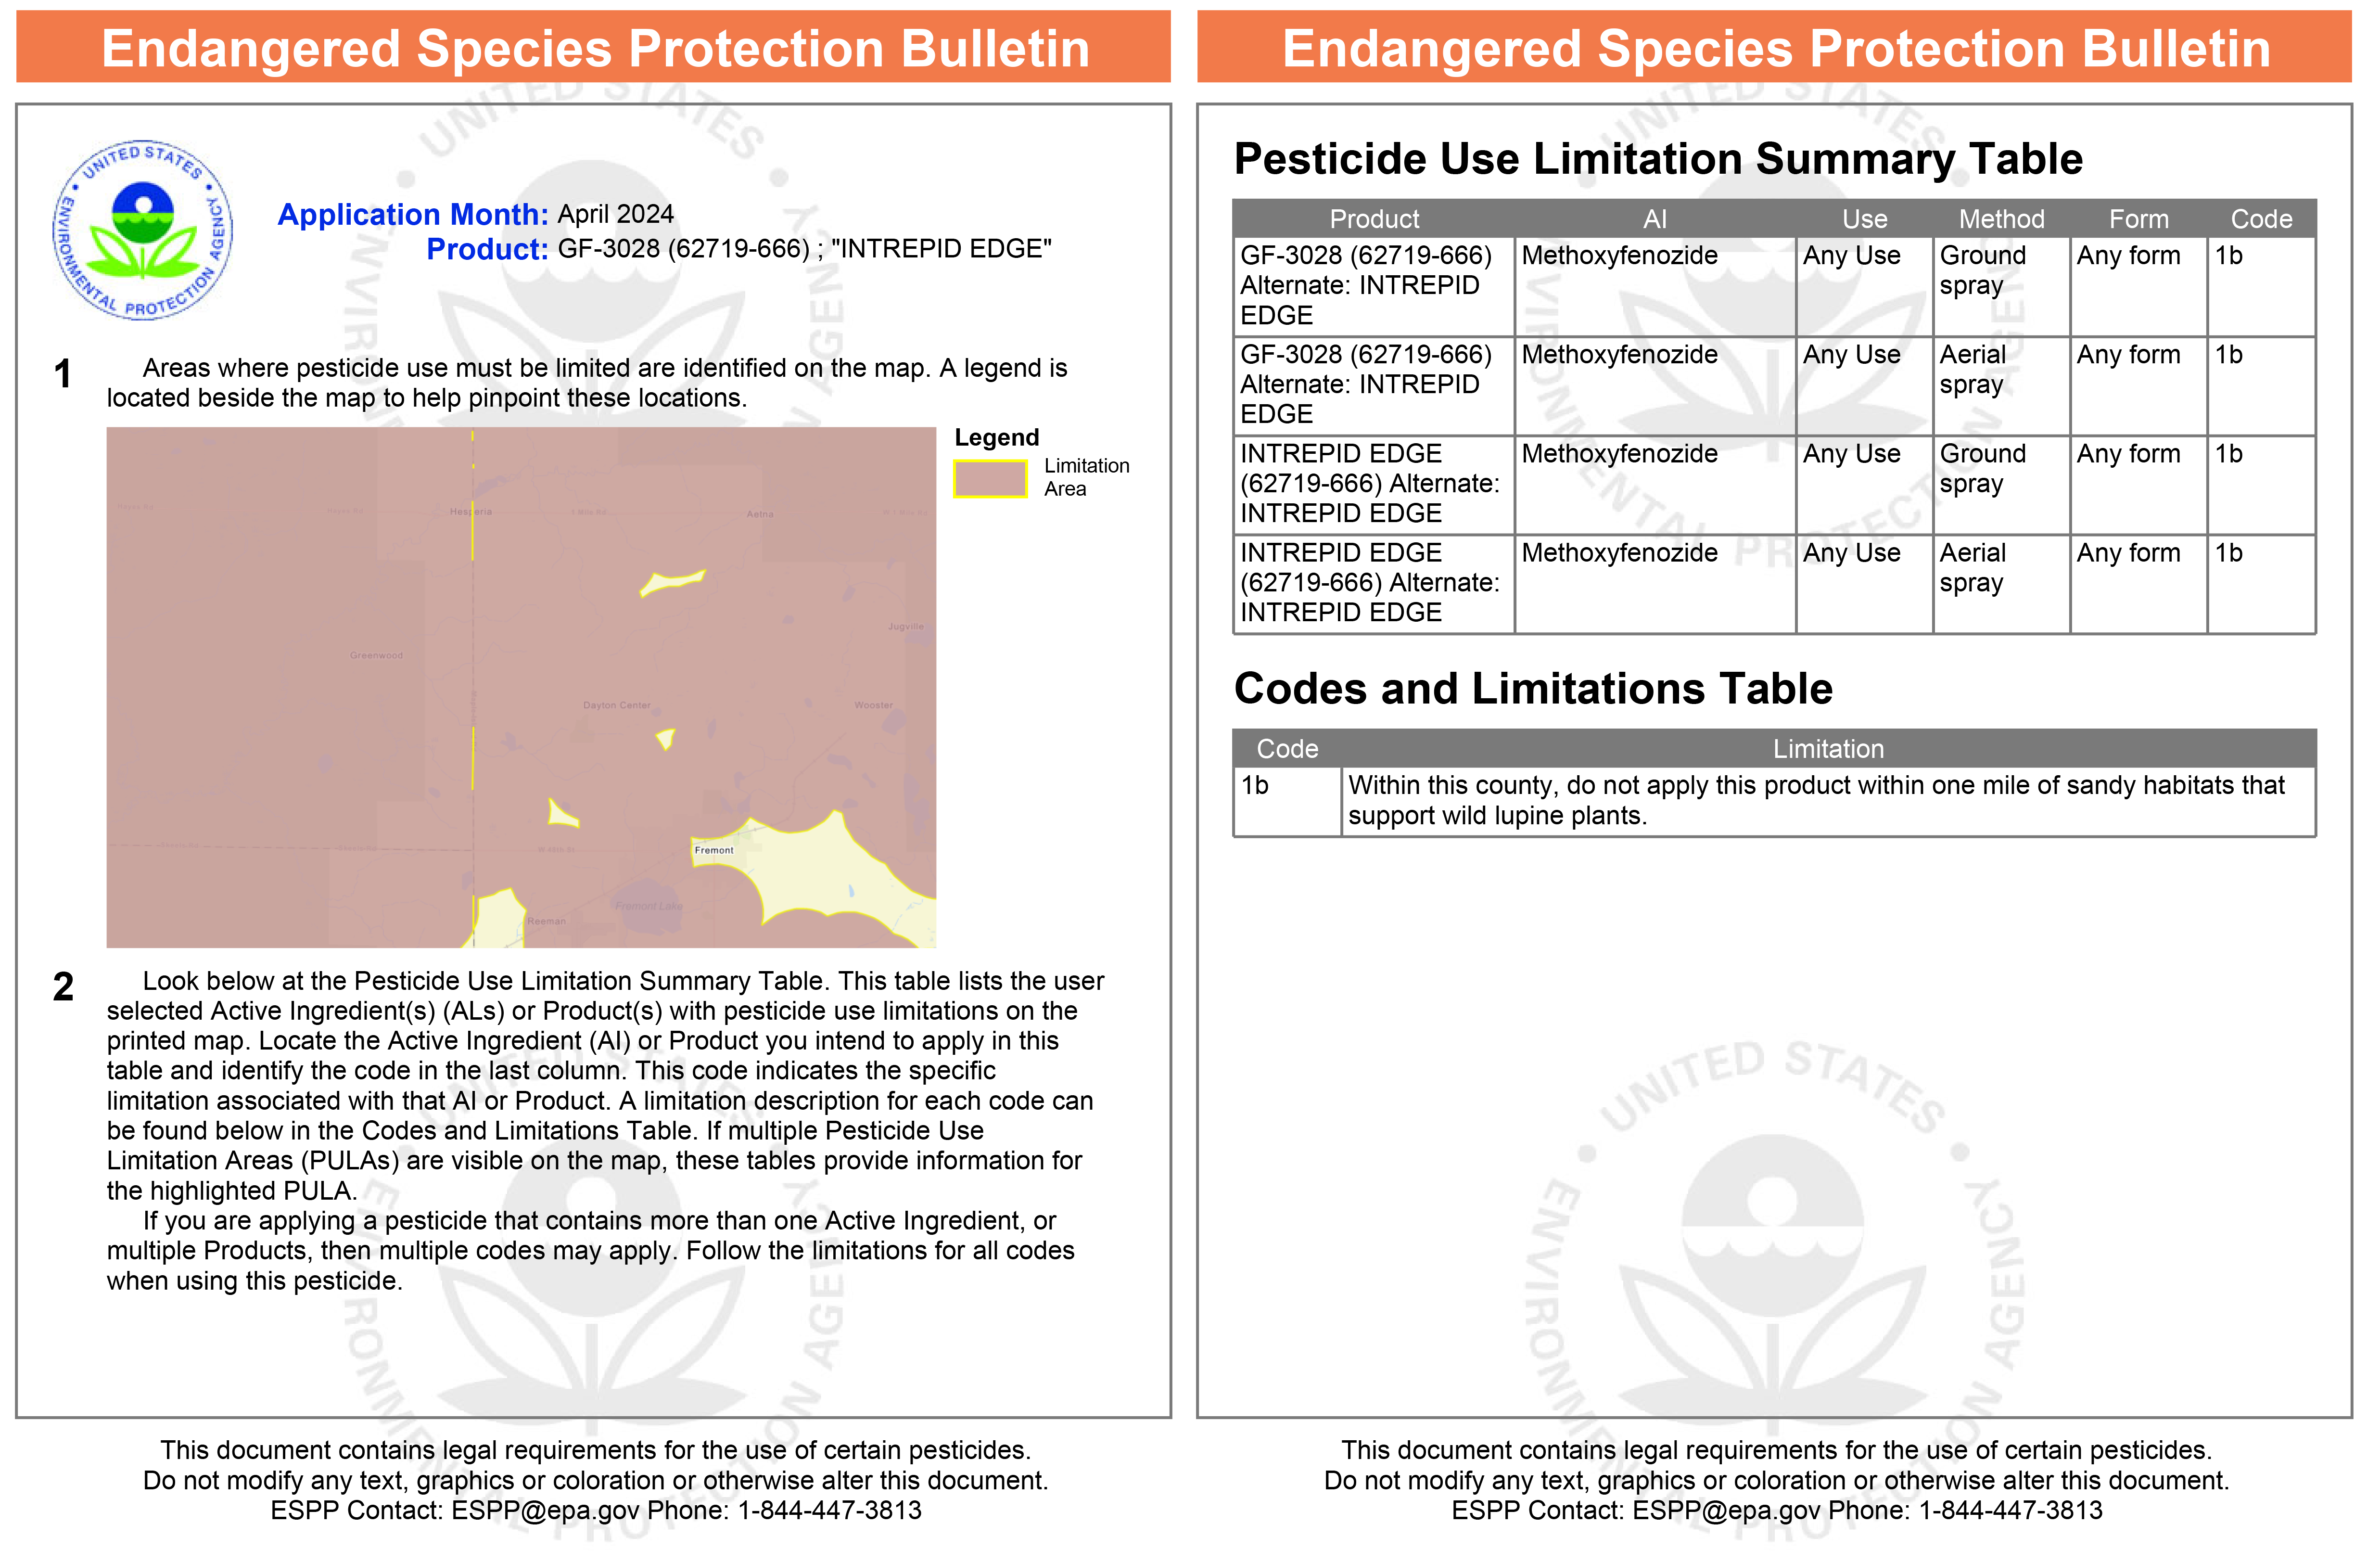 Examples of Endangered Species Protection Bulletins.